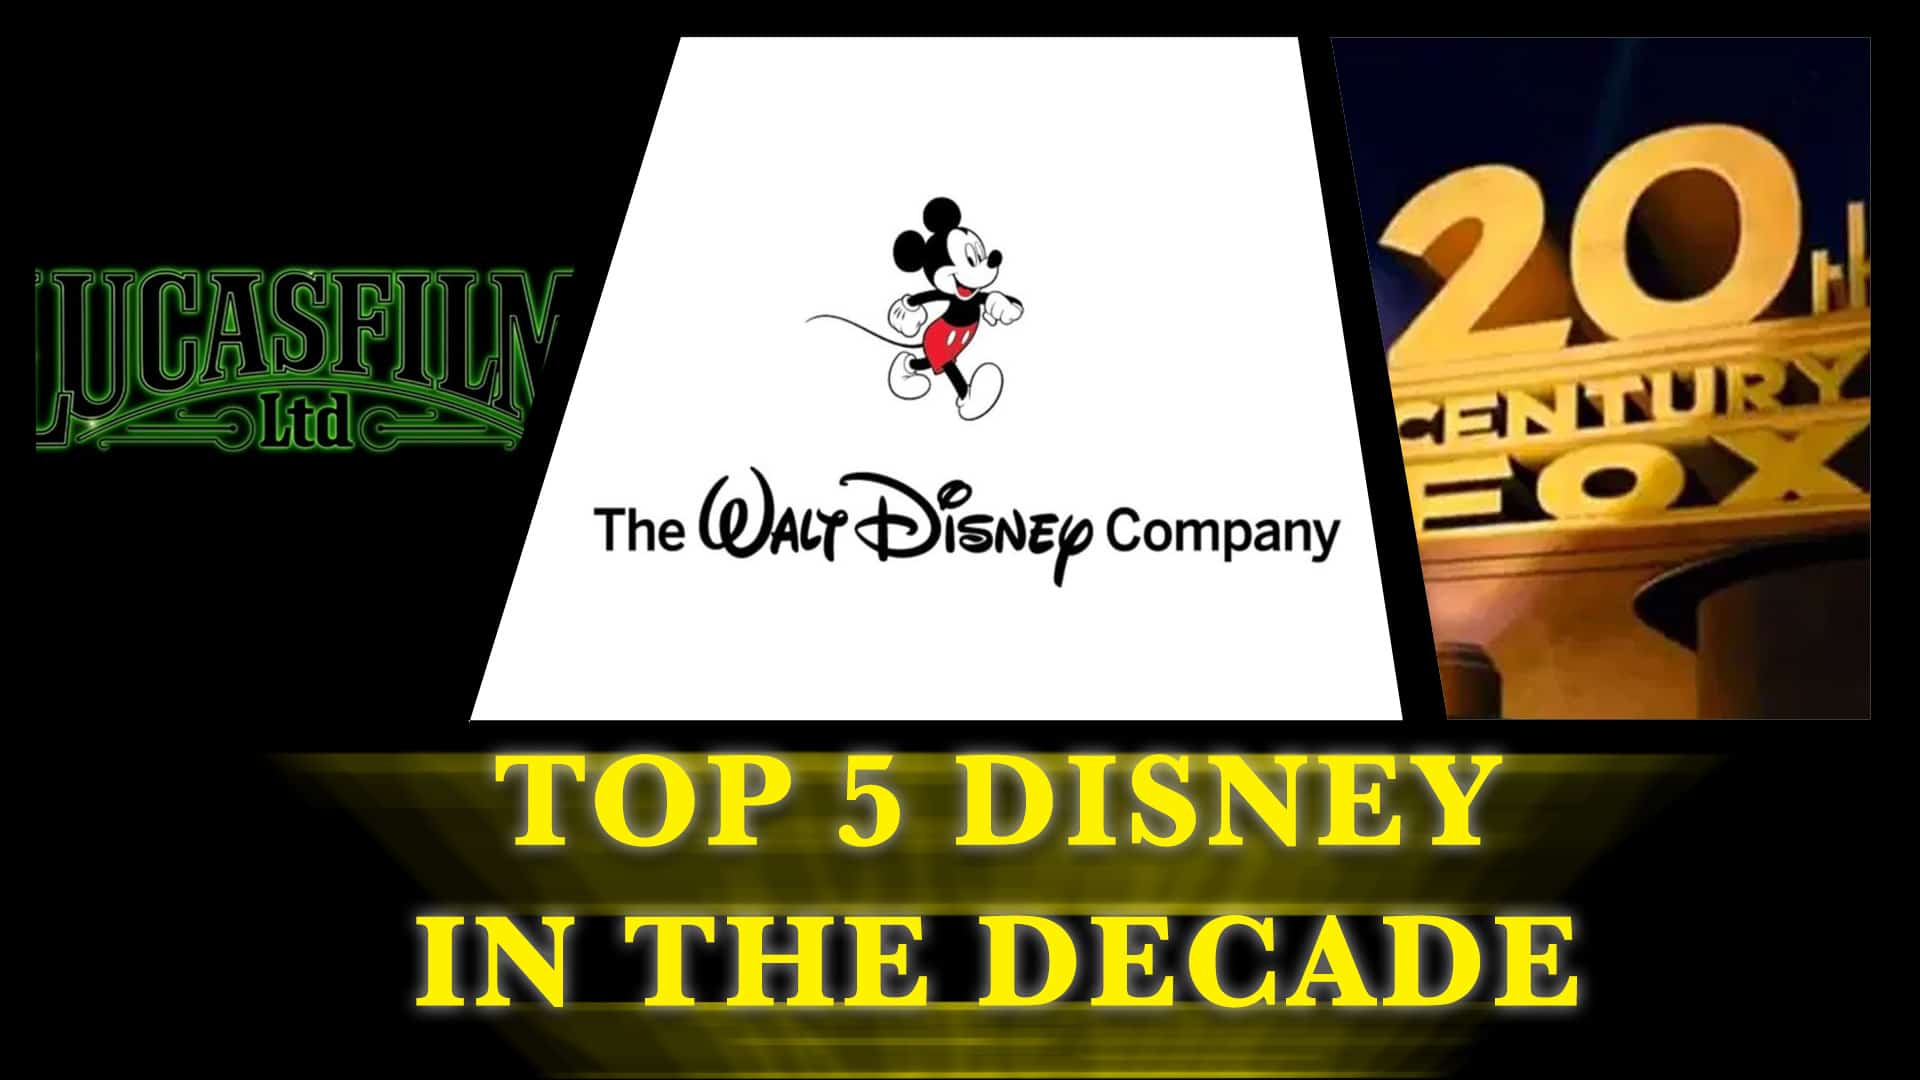 Disney Acquires Lucasfilm and Fox – #1 of Top 5 Disney Stories of the Decade